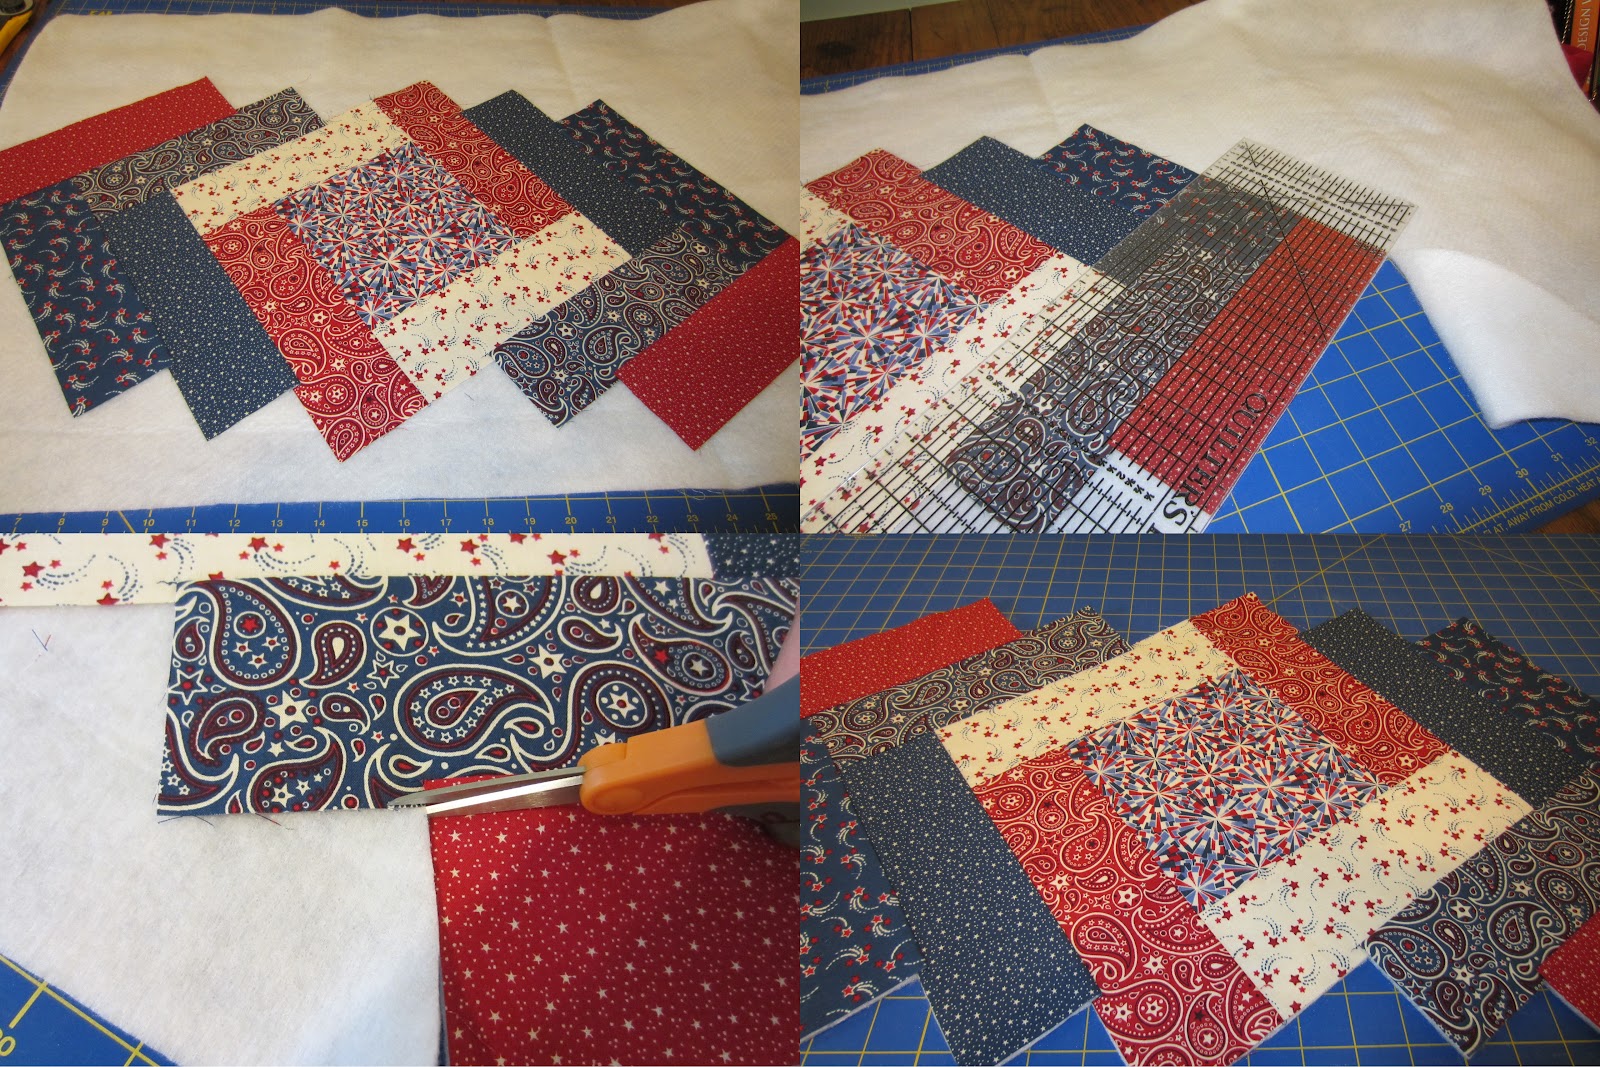 My Patchwork Quilt: PATRIOTIC TABLE RUNNER